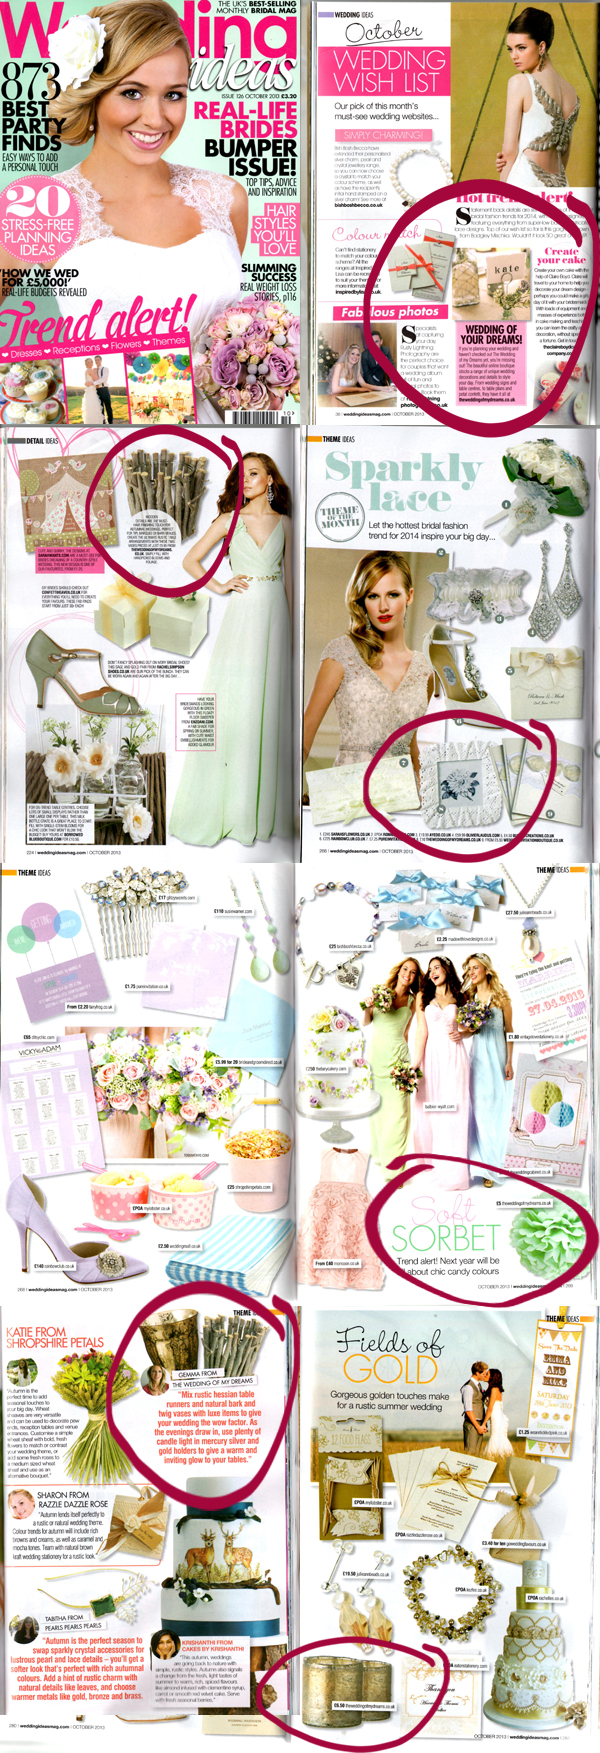 the wedding of my dreams featured in wedding ideas magazine